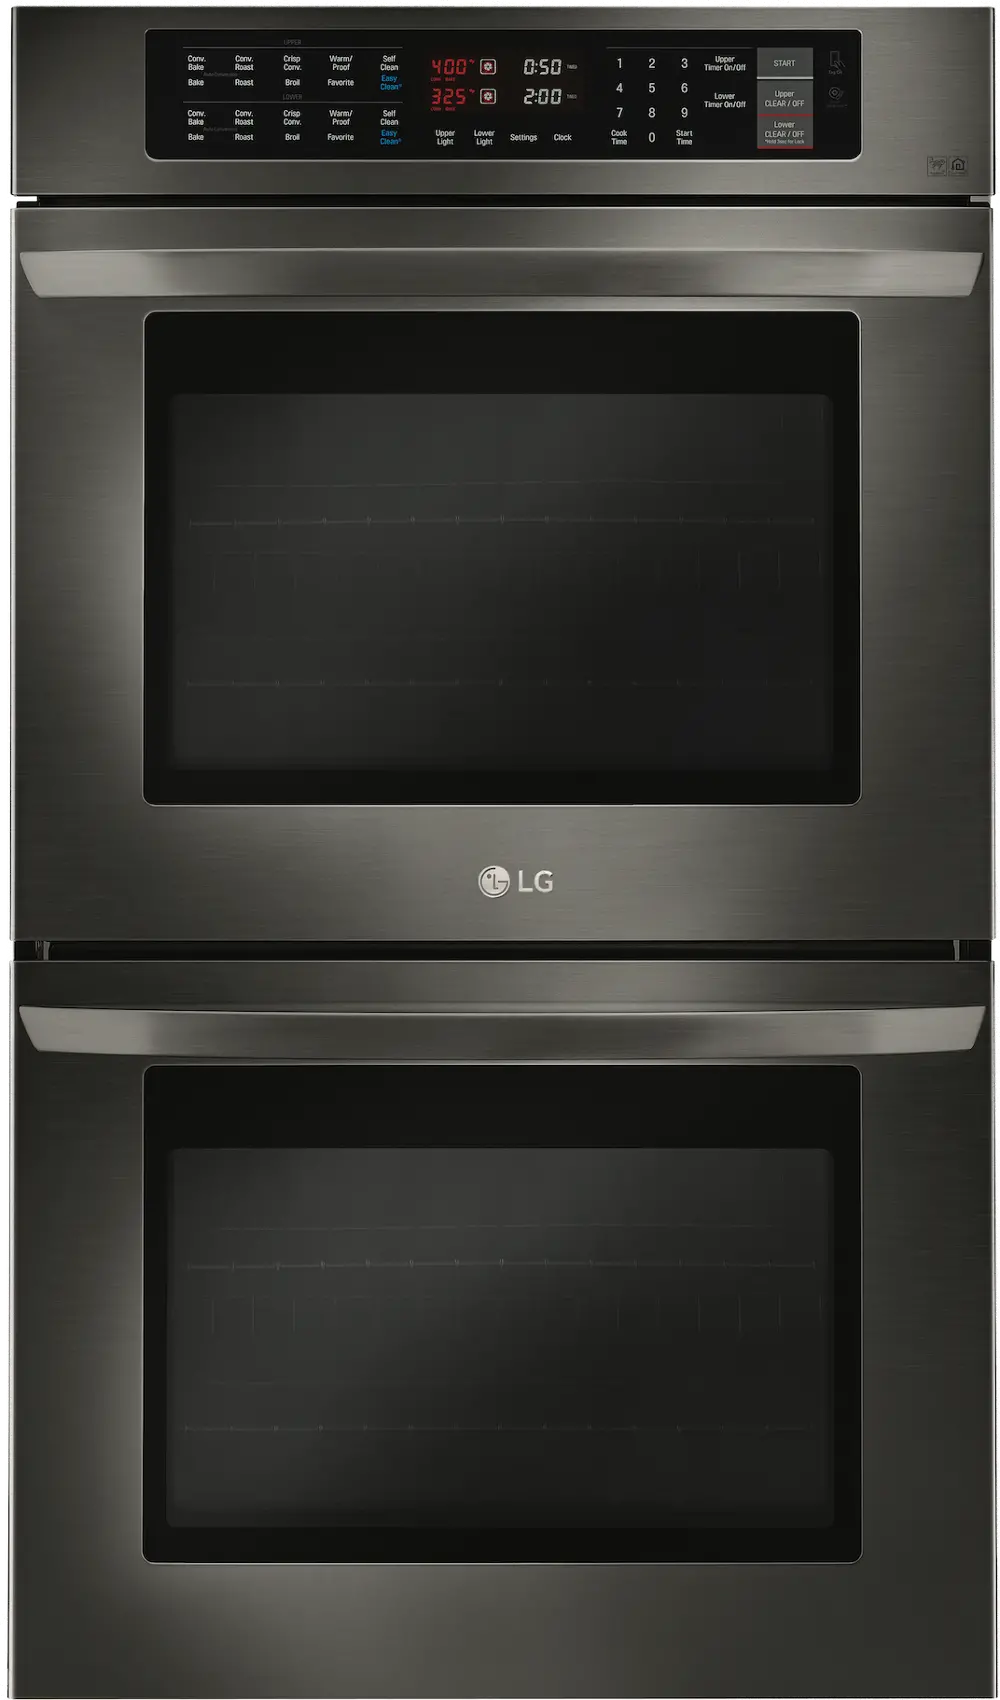 LWD3063BD LG 9.4 cu ft Double Wall Oven - Black Stainless Steel 30 Inch-1